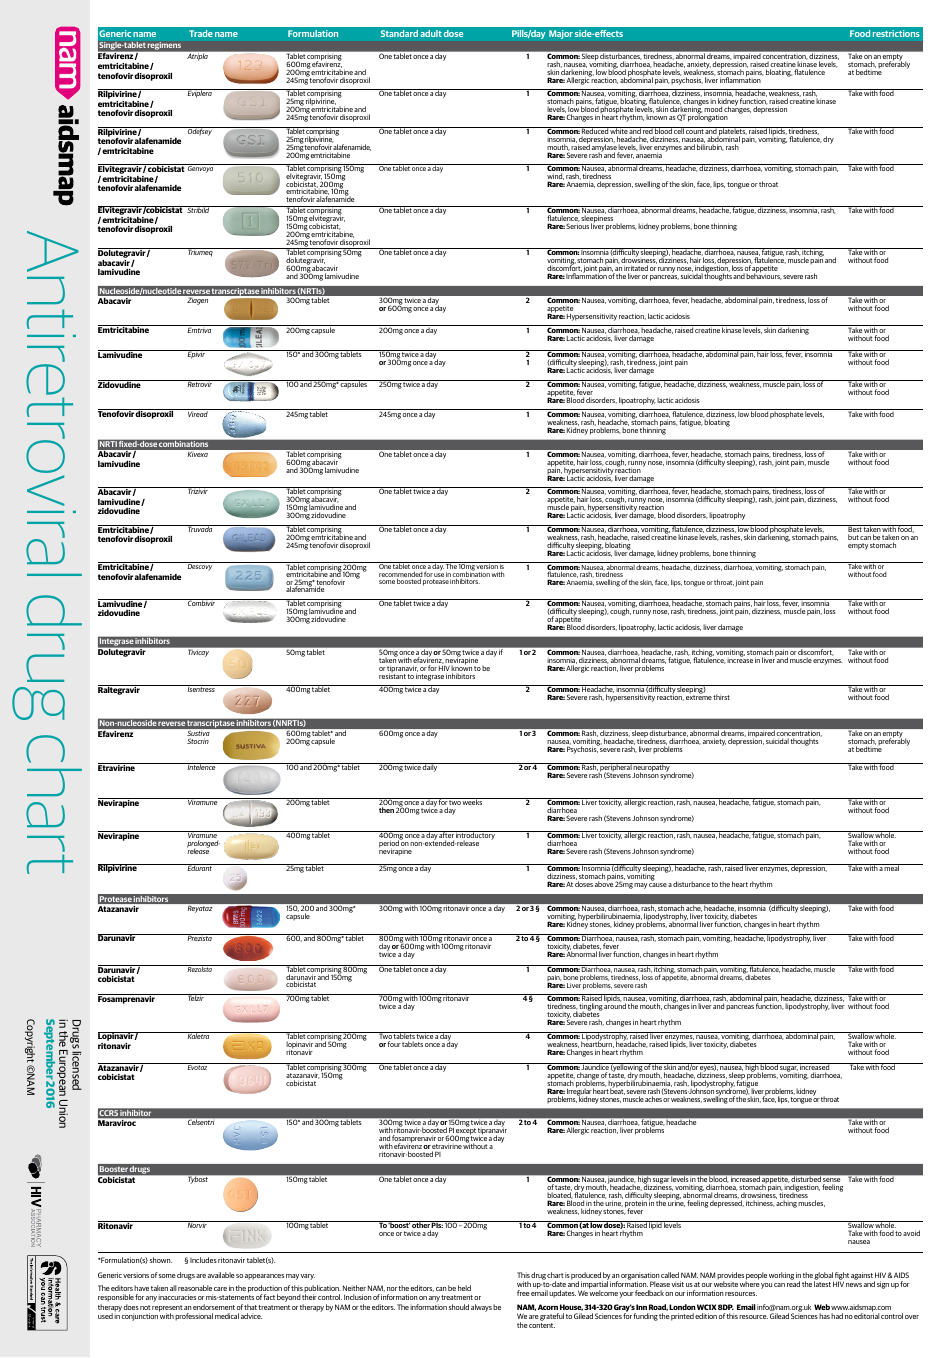 Preview of the Antiretroviral Drug Chart, a comprehensive resource on antiretroviral drugs for the management of HIV infection.